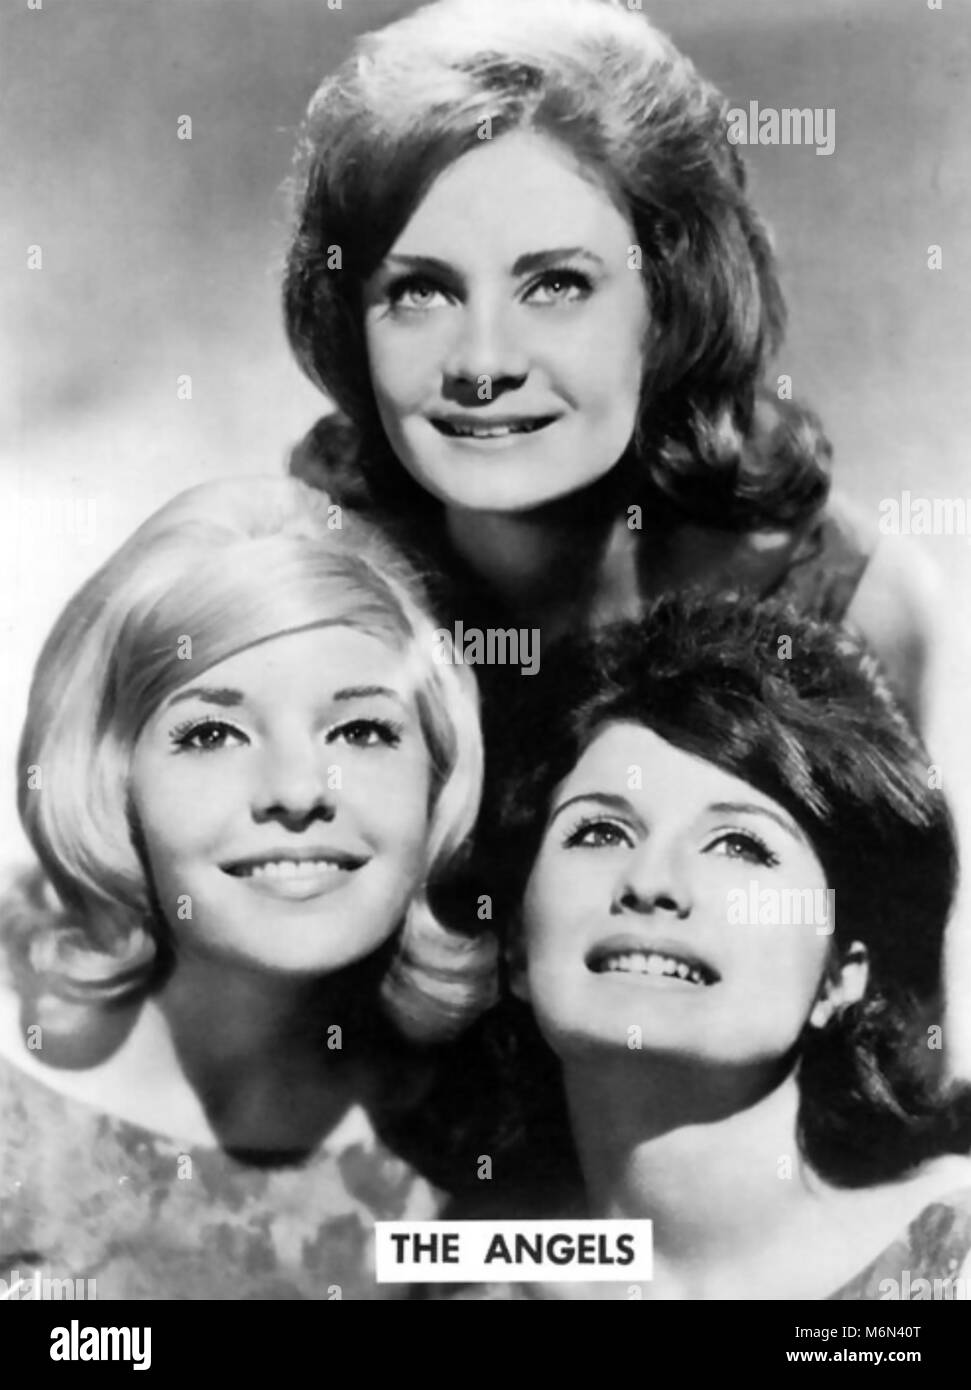 THE ANGELS Promotional photo of American girl vocal group in 1964 Stock Photo